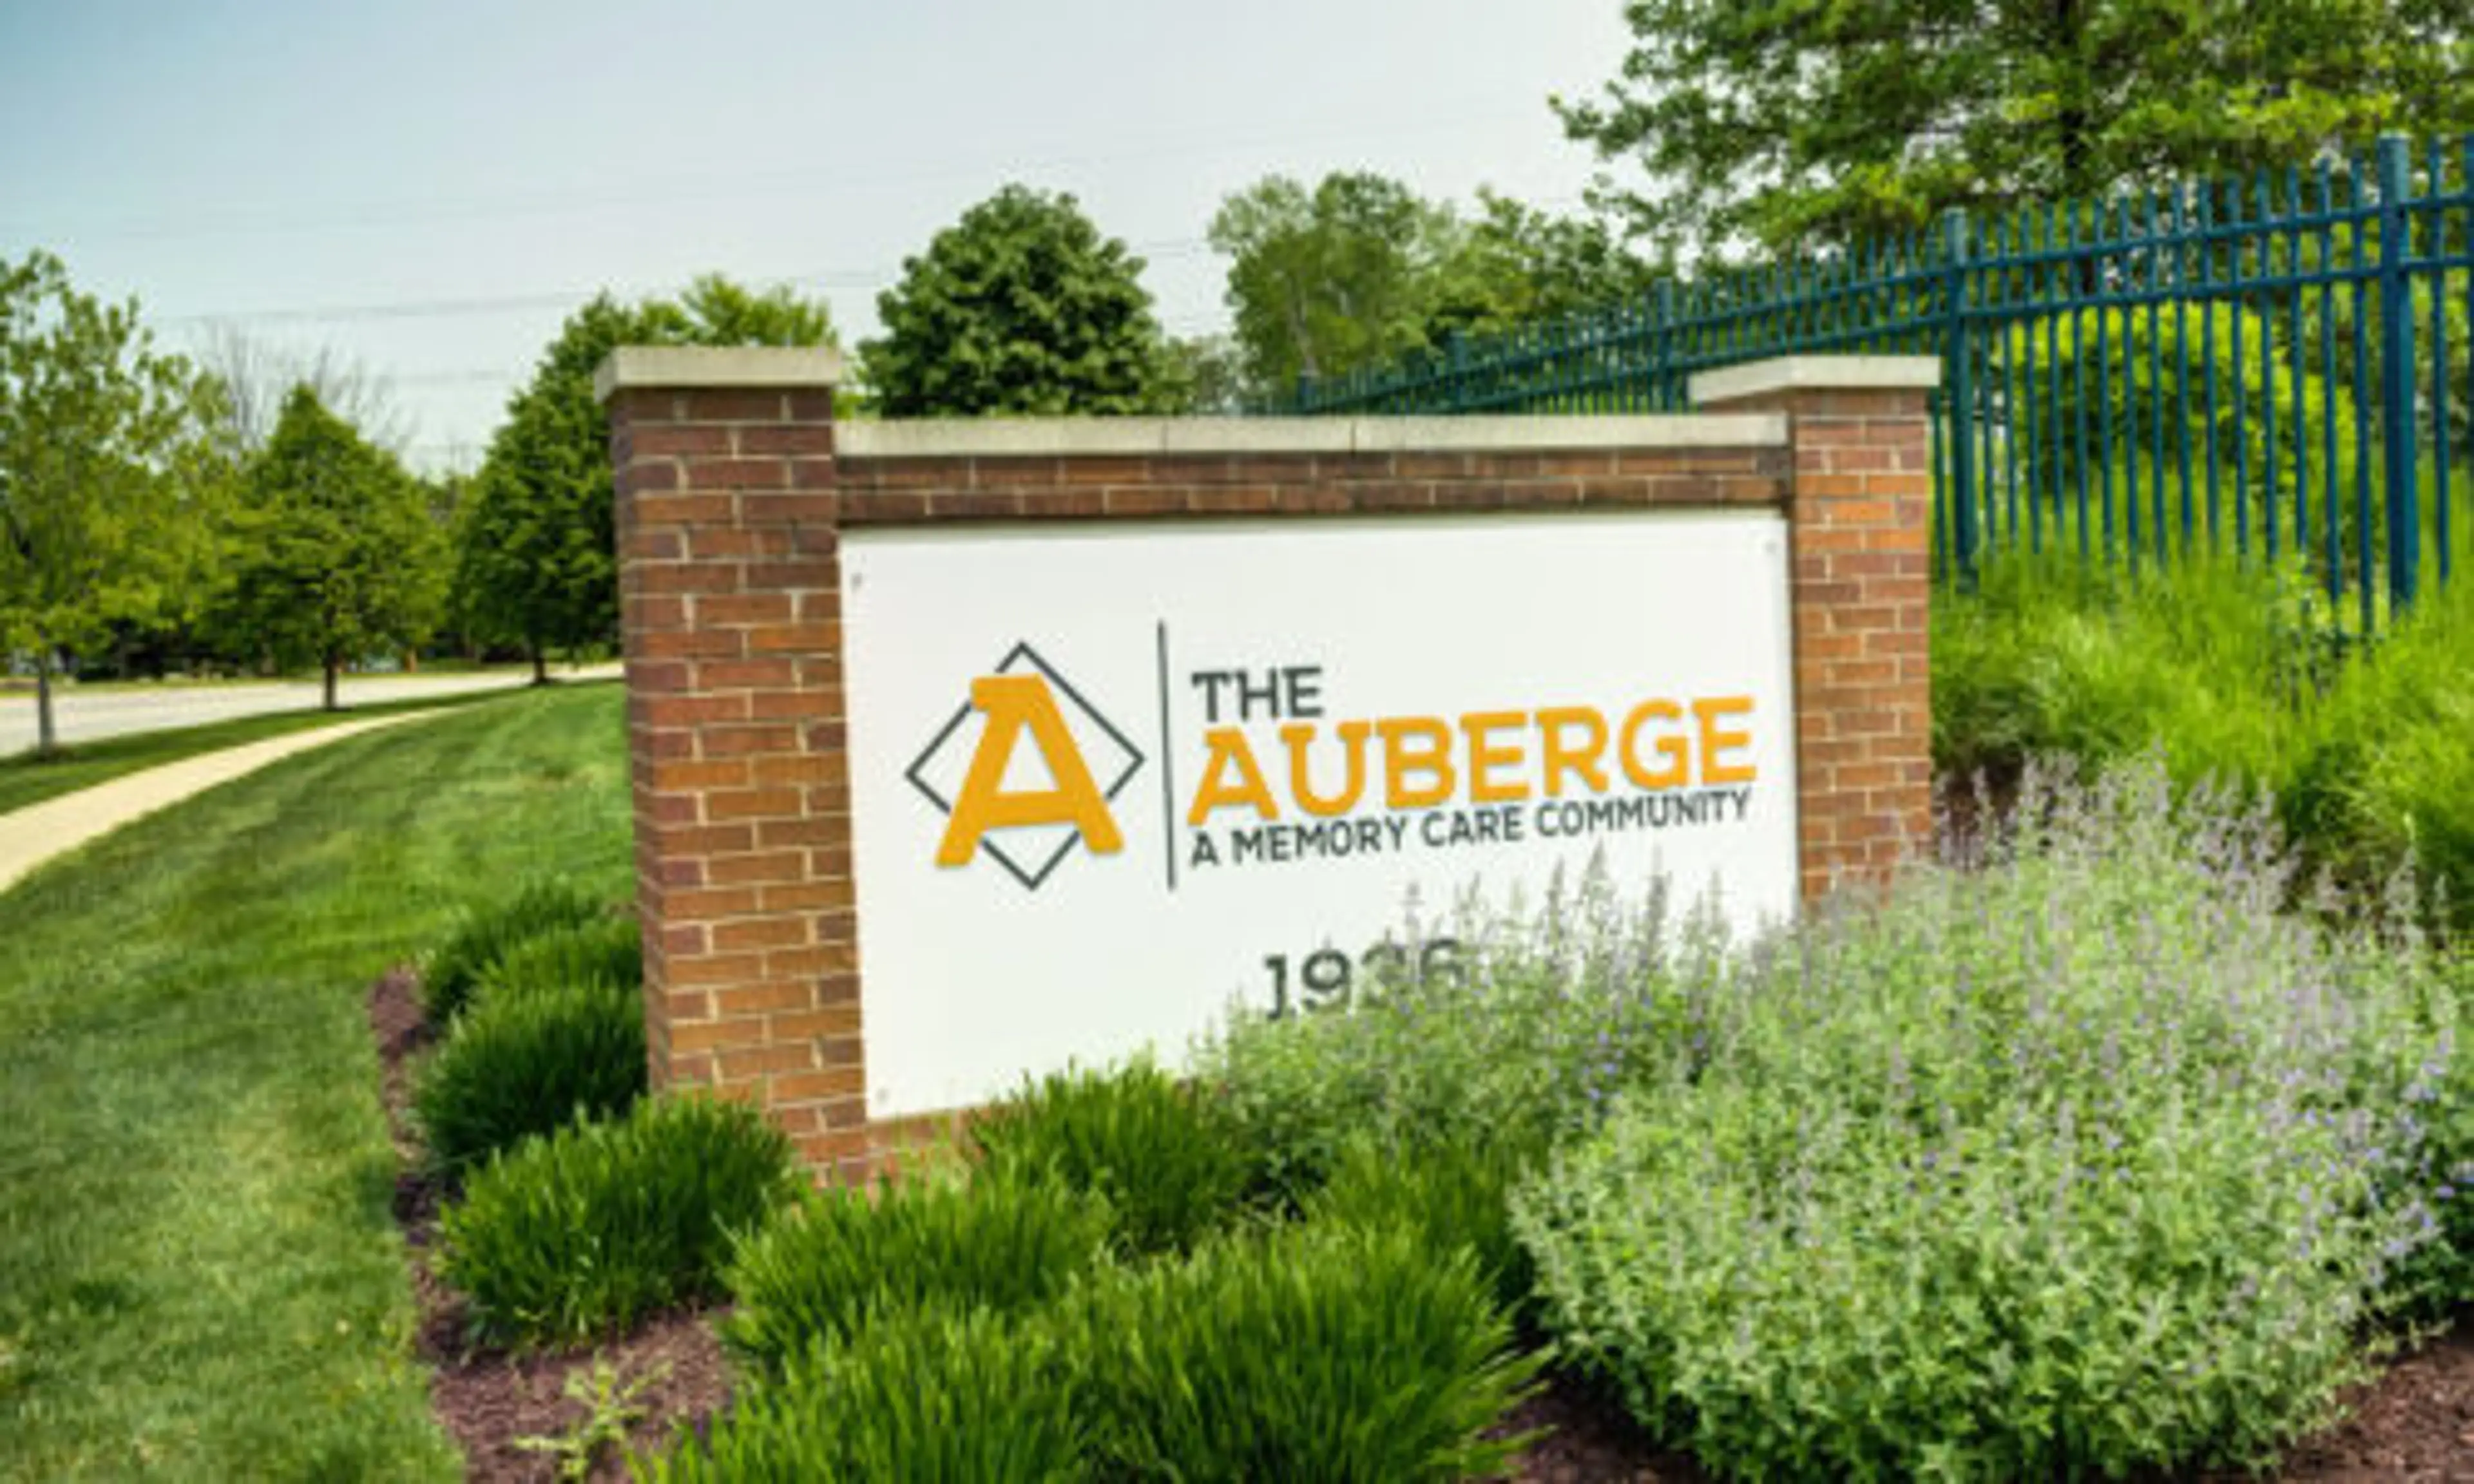 The Auberge at Naperville Community Sign